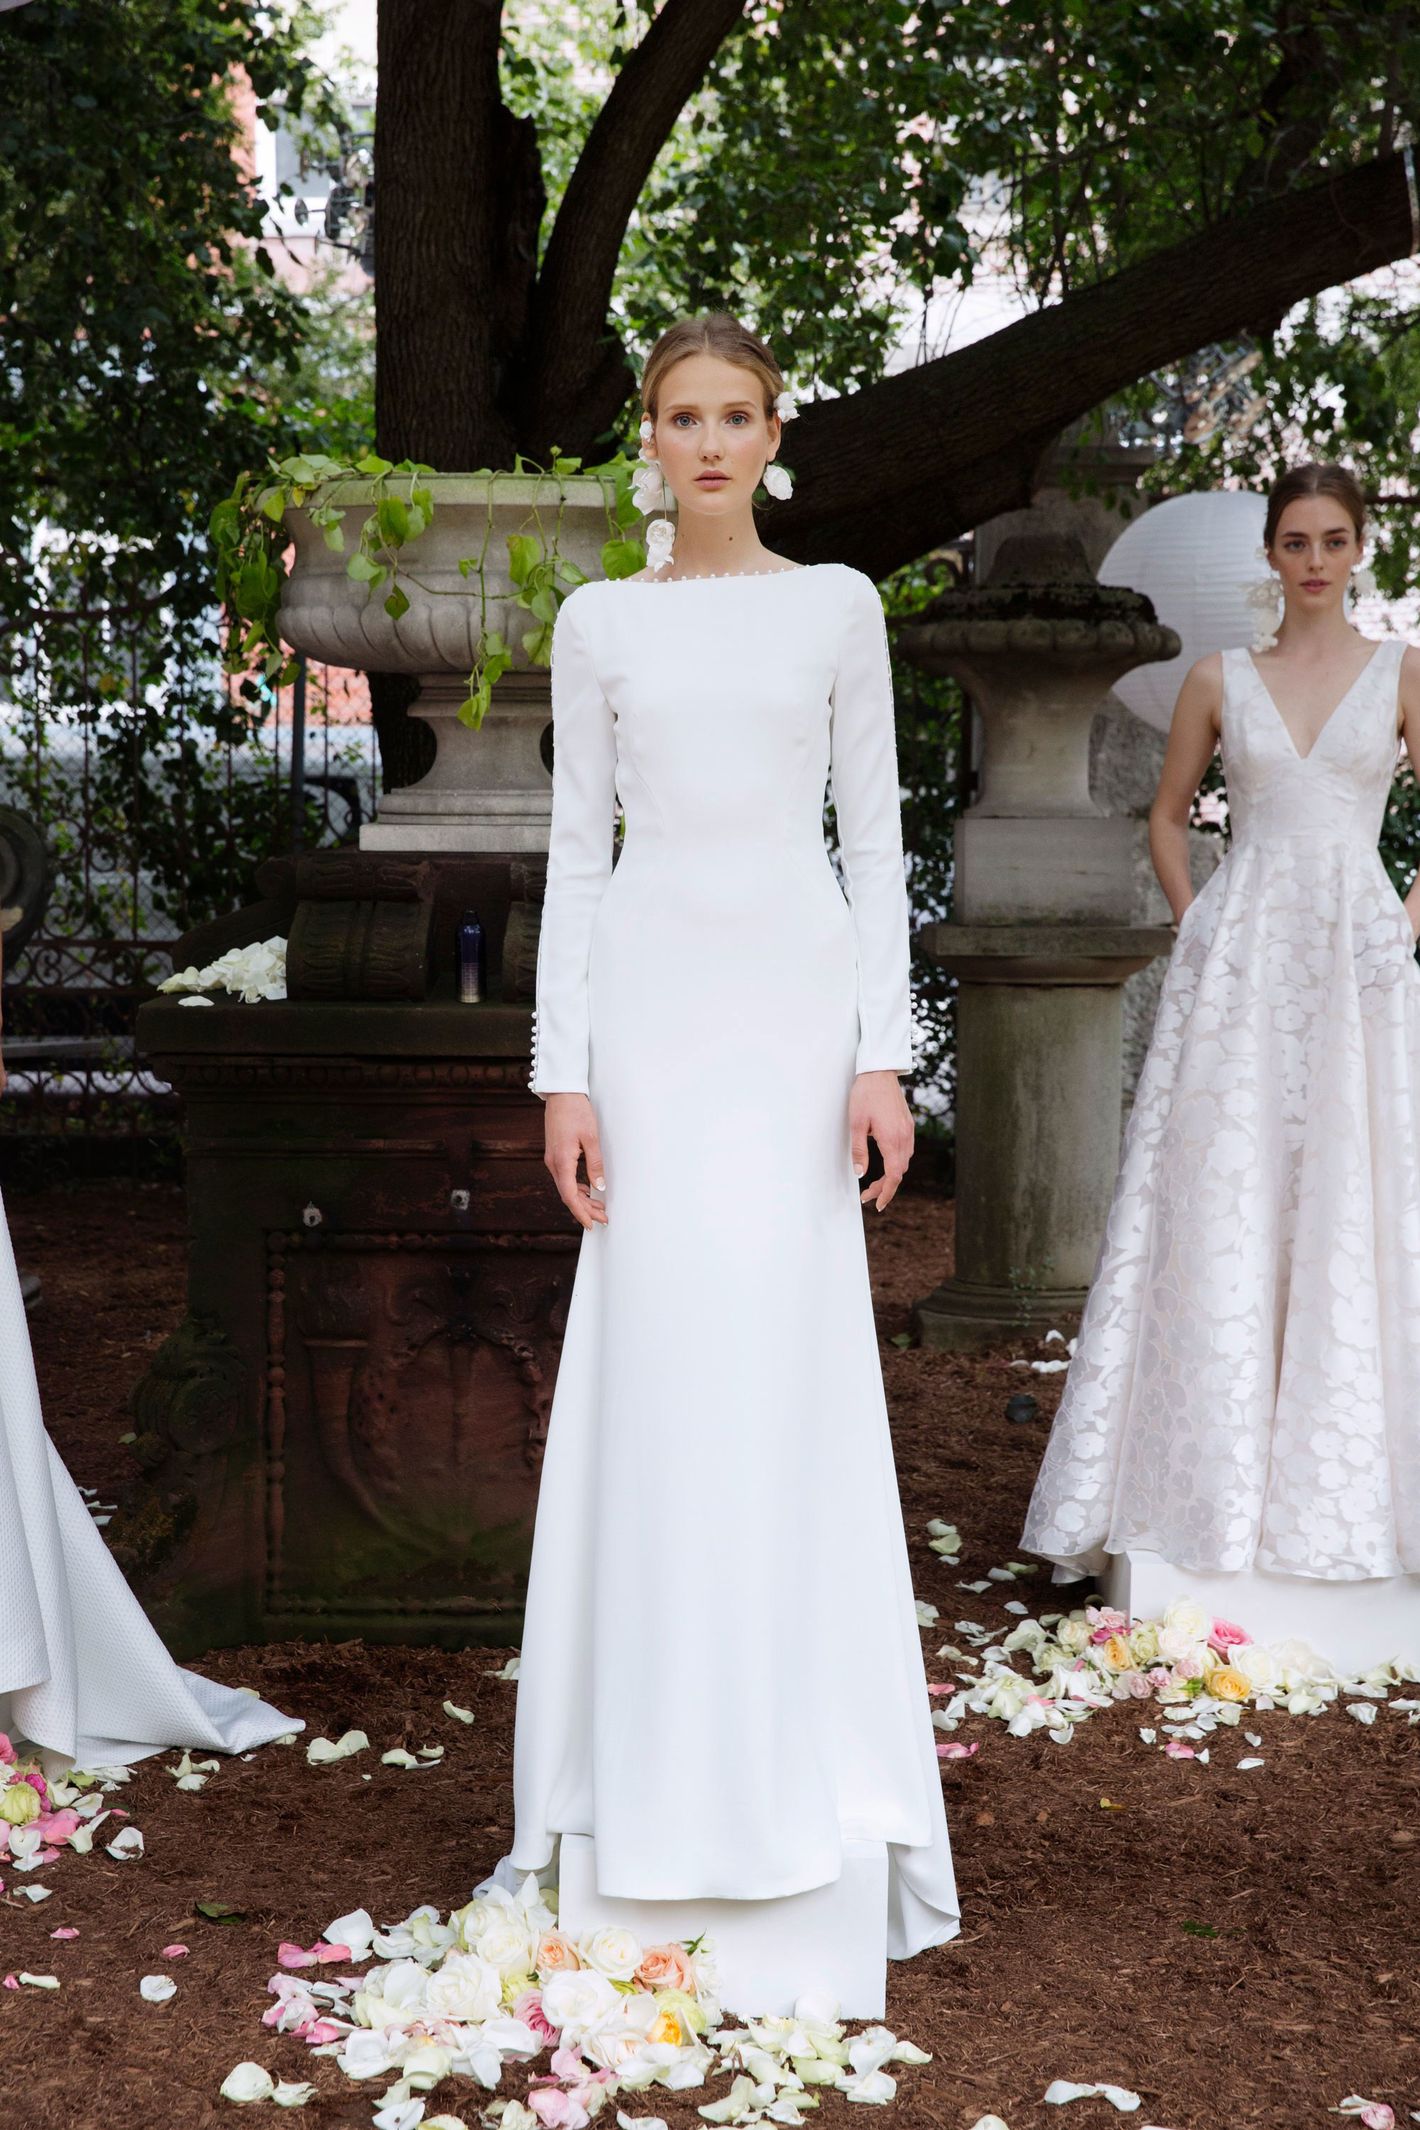 19 Bell Sleeve Wedding Dresses That Steal the Show